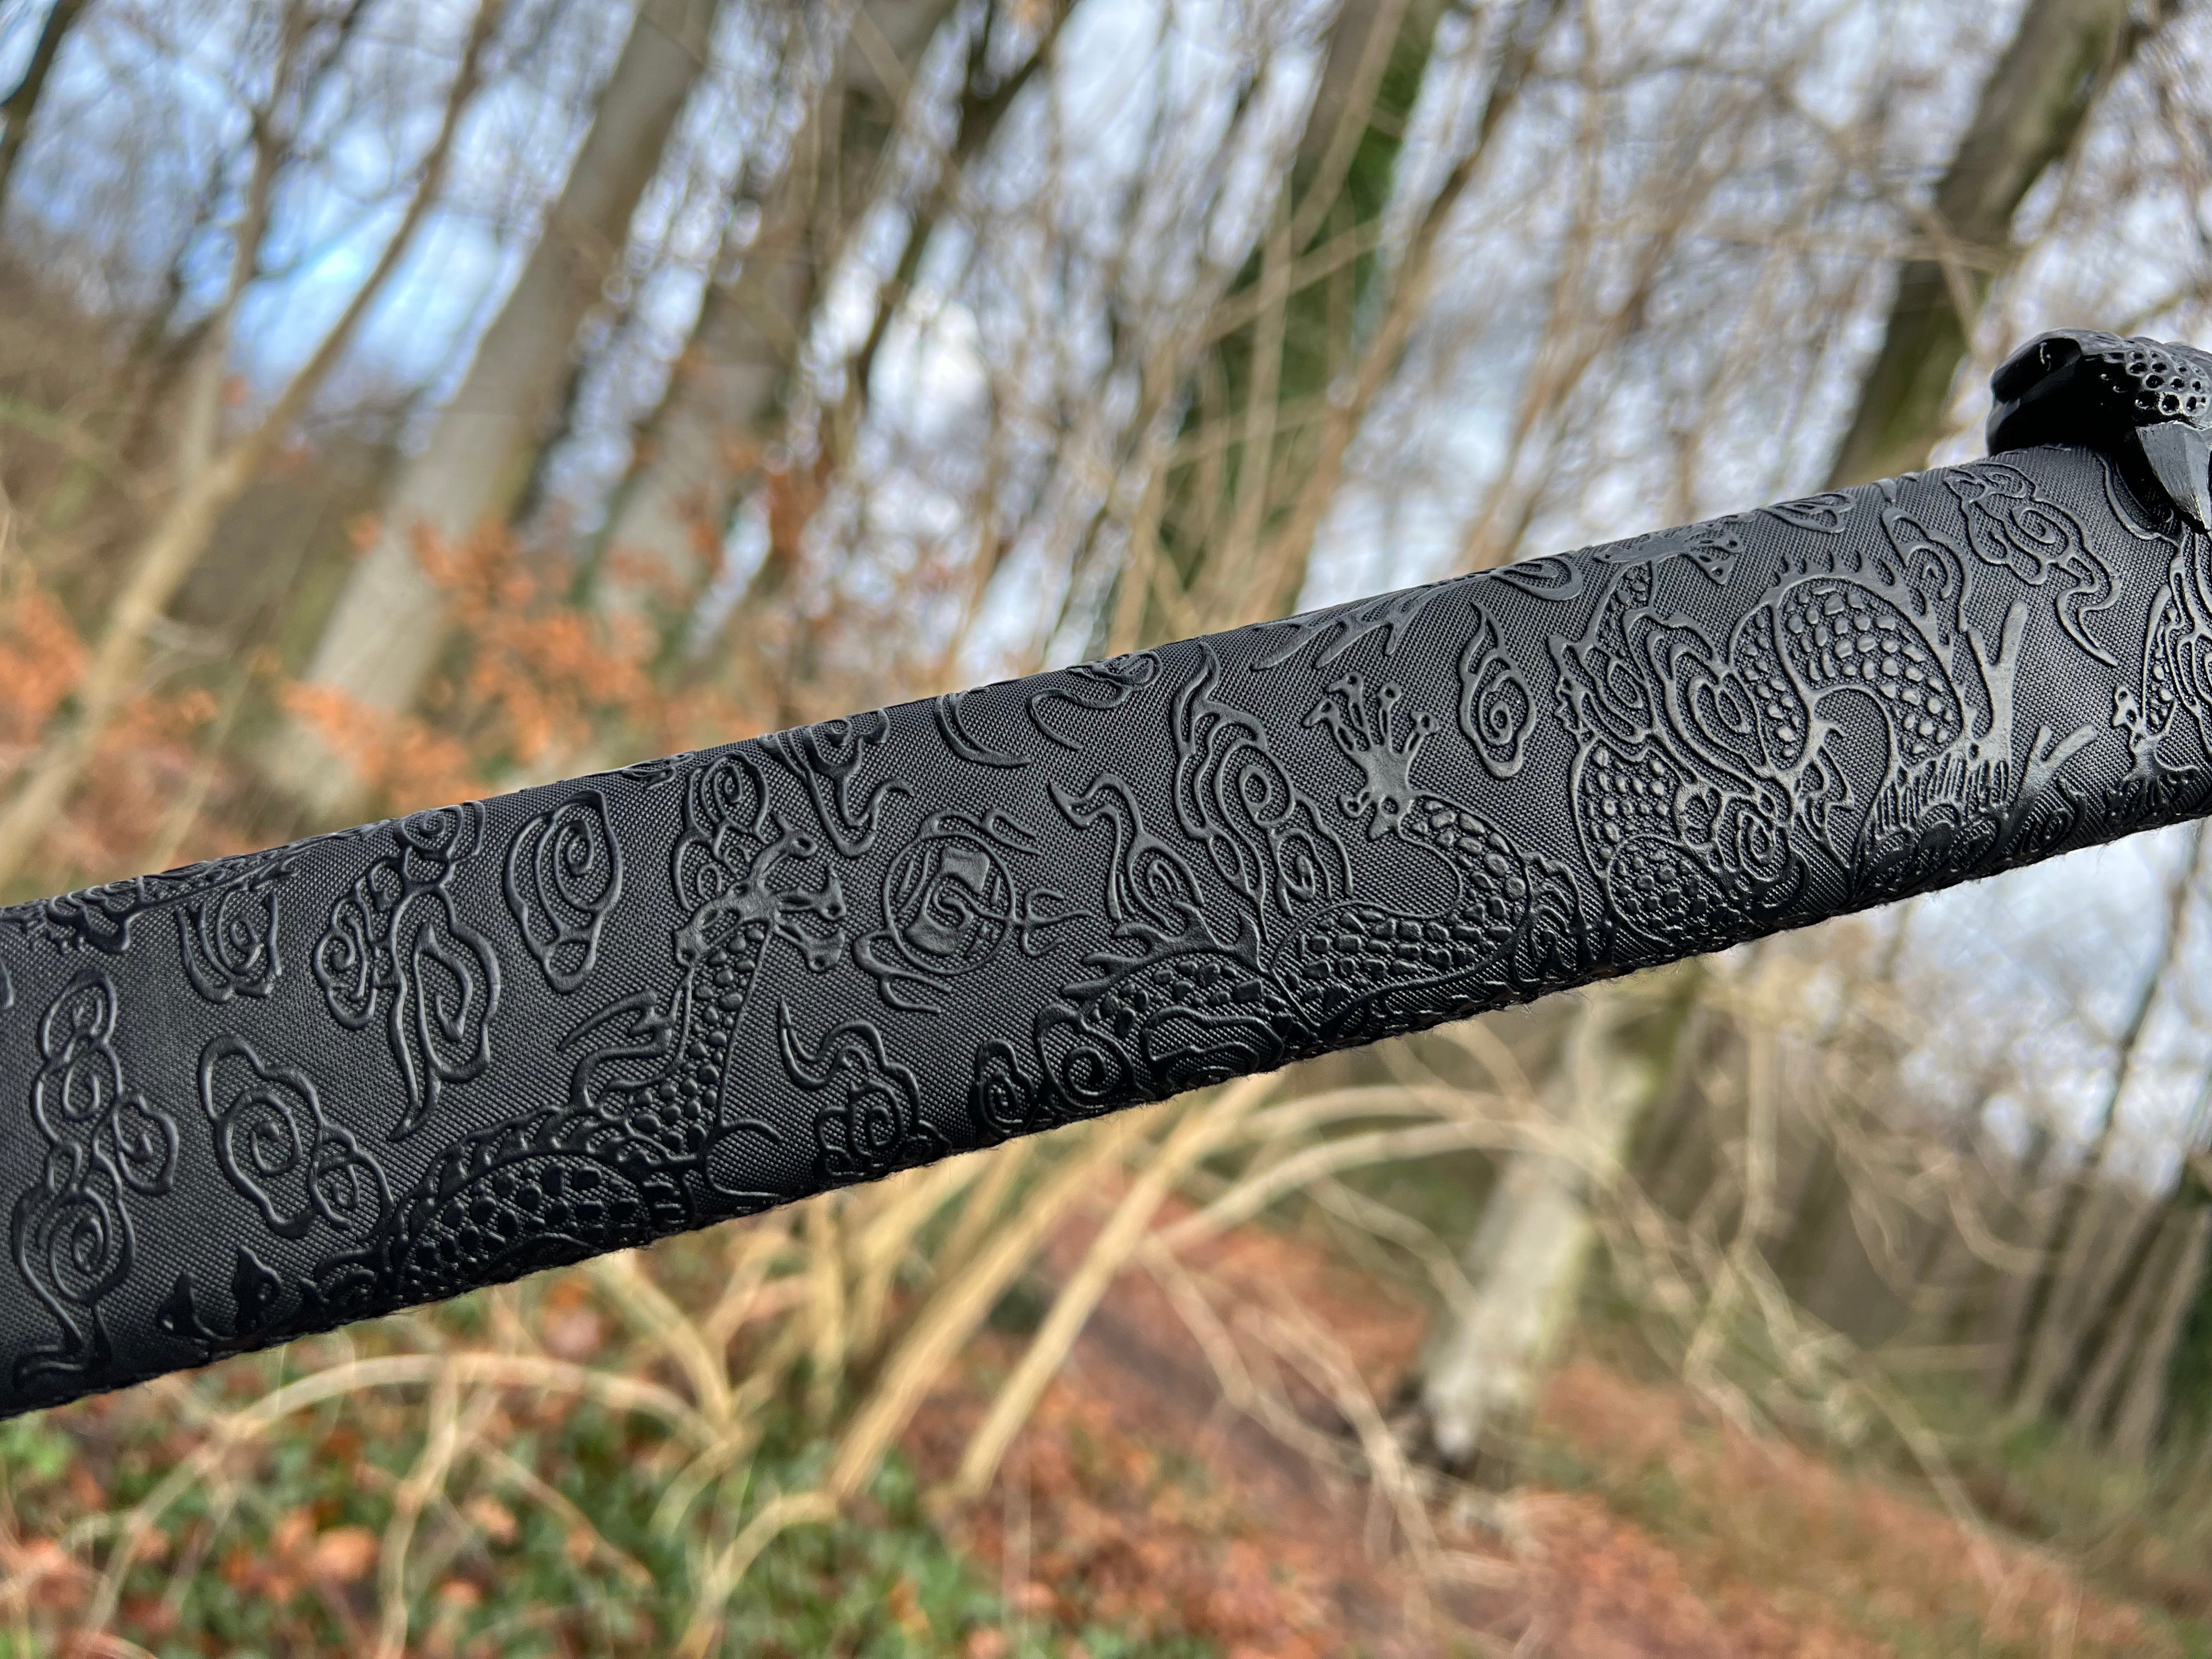 Practical Hand-Forged Longquan Sword with Wolf's Head (Black)